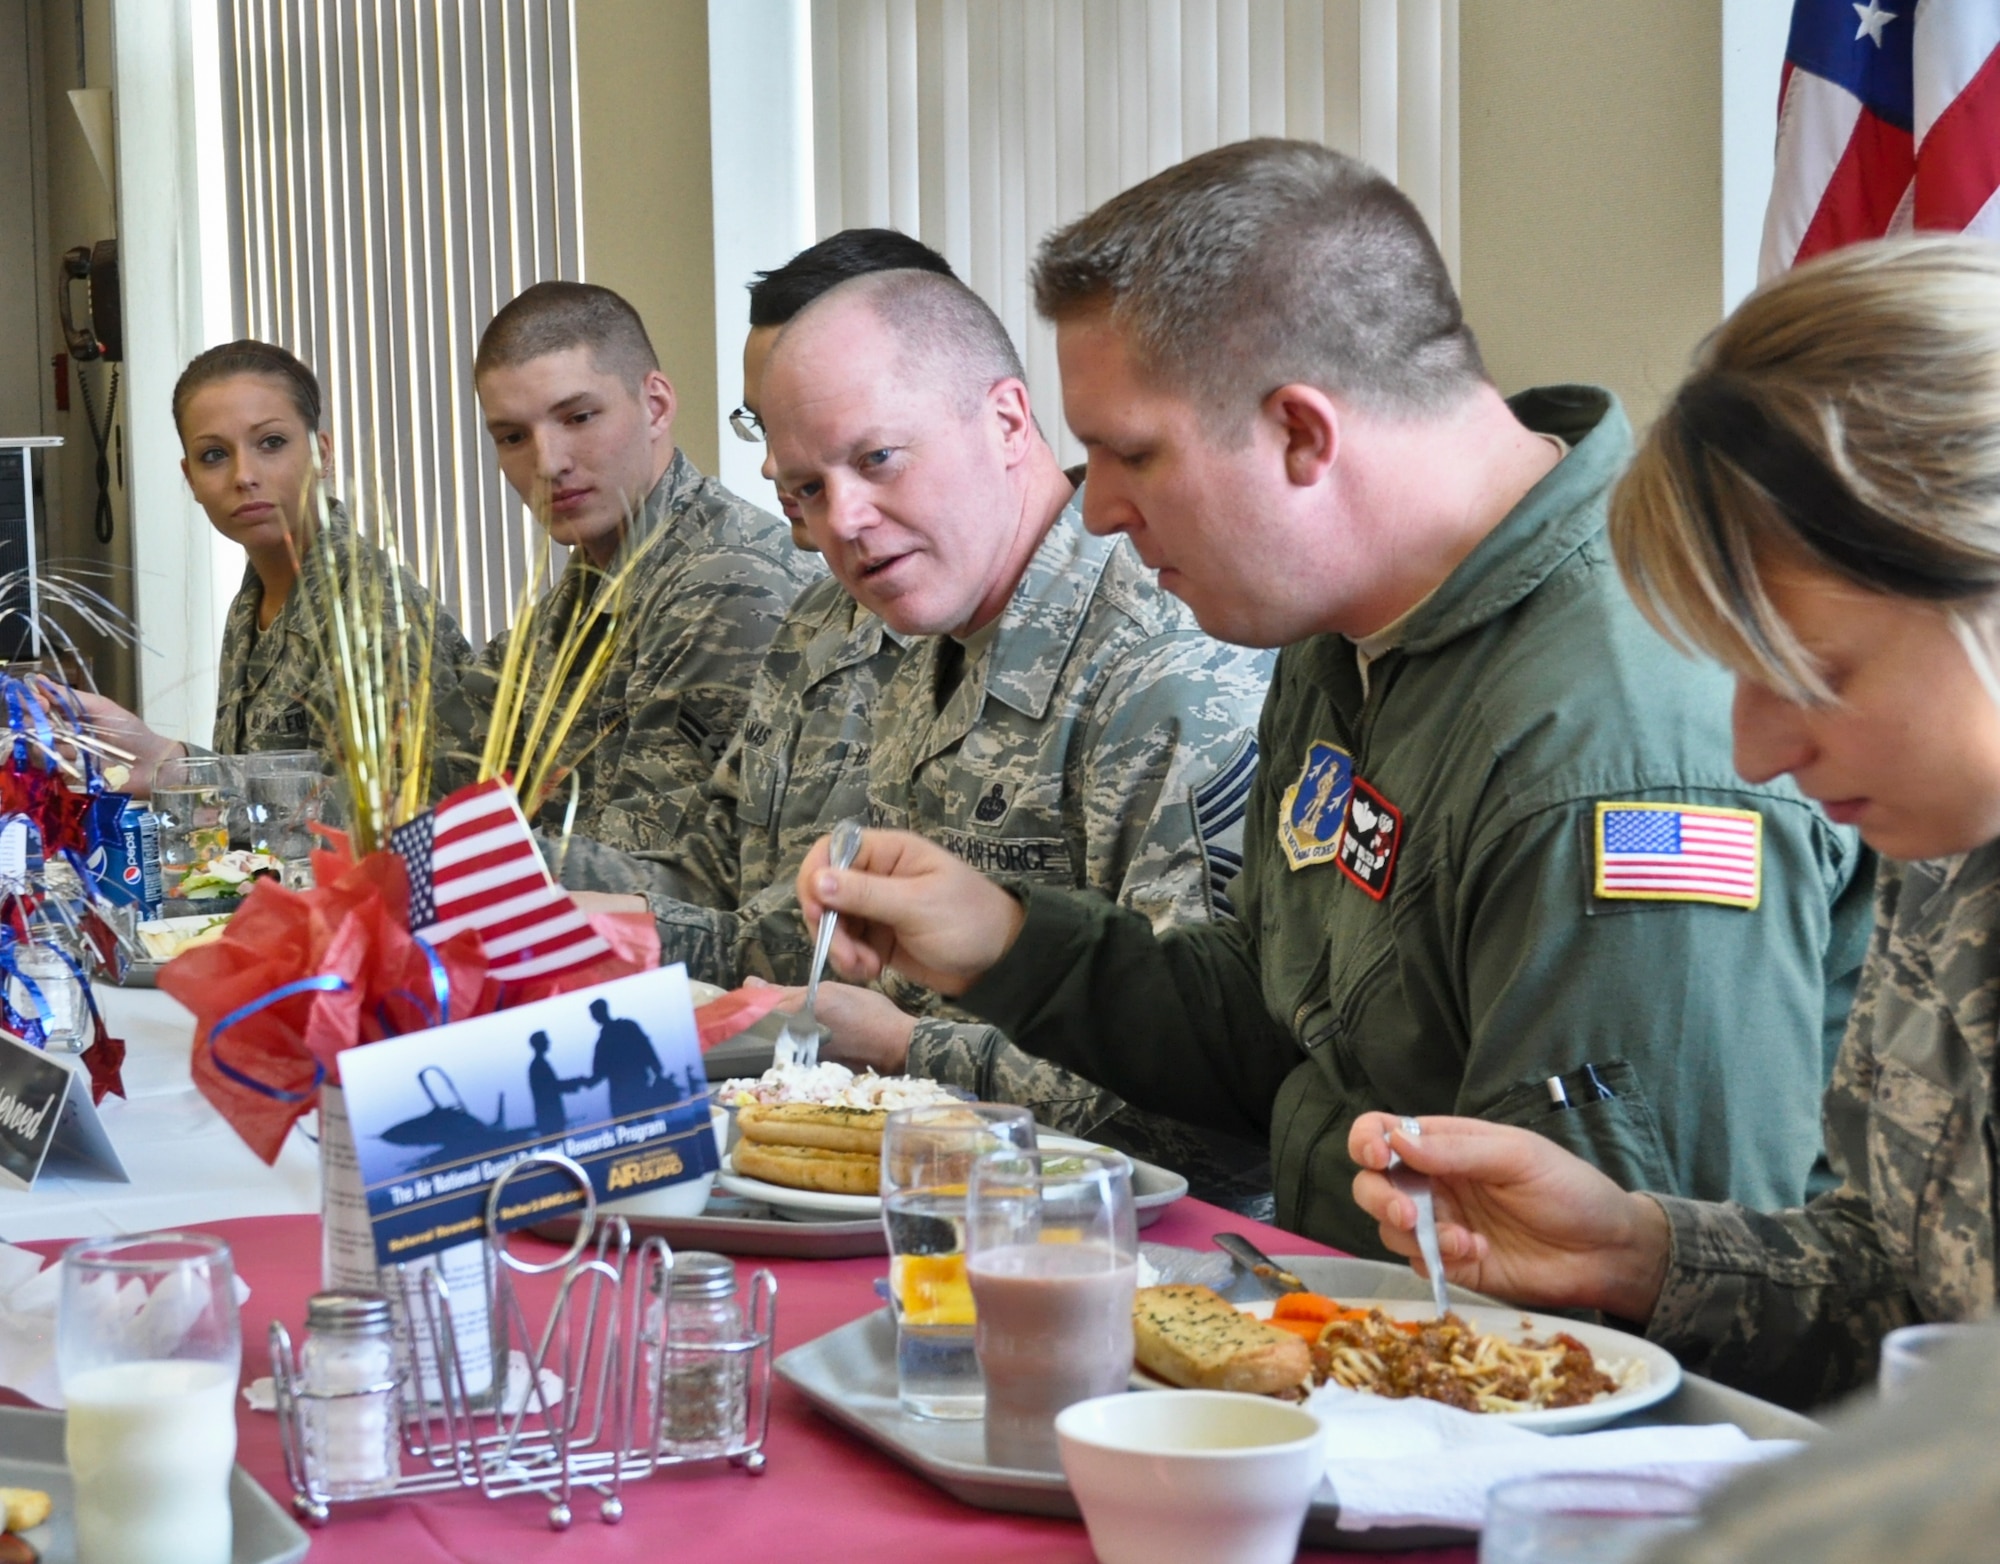 Command Chief Master Sgt. Christopher E. Muncy, command chief of the Air National Guard, prepares to answer questions posed by members of the 128th Air Refueling Wing's enlisted Airmen while having lunch at Sijan Hall in Milwaukee on January 08, 2012. Muncy was at the 128 ARW in part of tour of all the Air National Guard bases located in Wisconsin. USAF Photograph by Staff Sgt. Jeremy Wilson